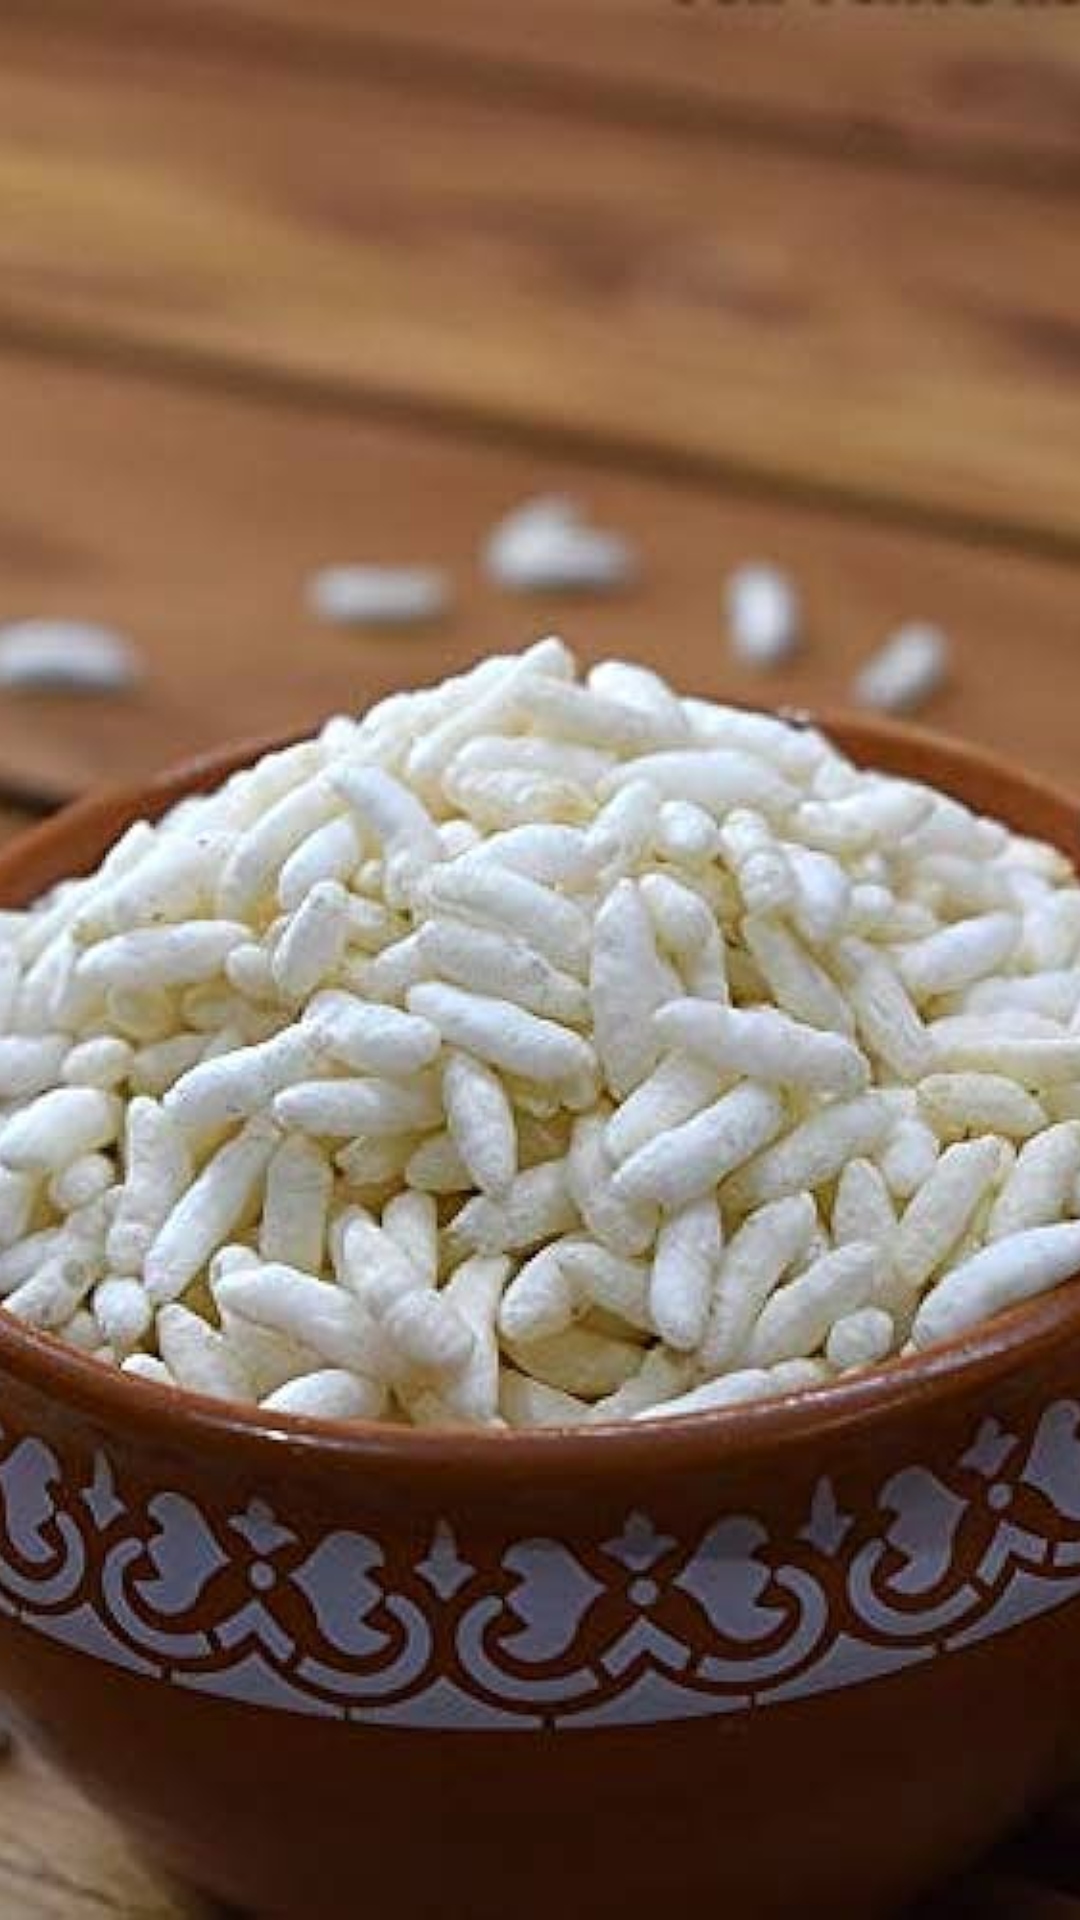 5 health benefits of eating Puffed Rice